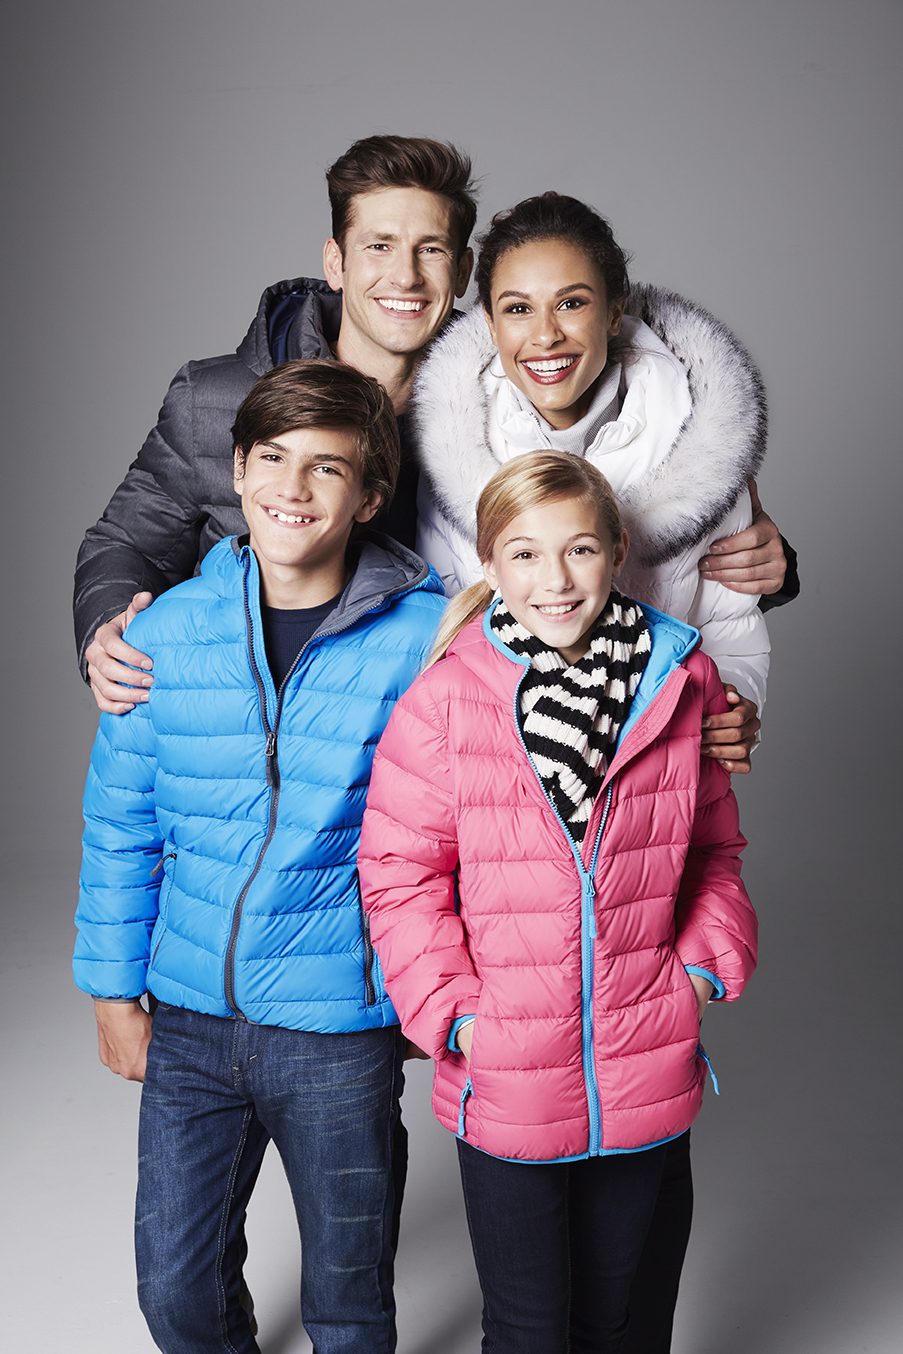 Macy's brings back 'Buy a Coat and We'll Donate One' campaign